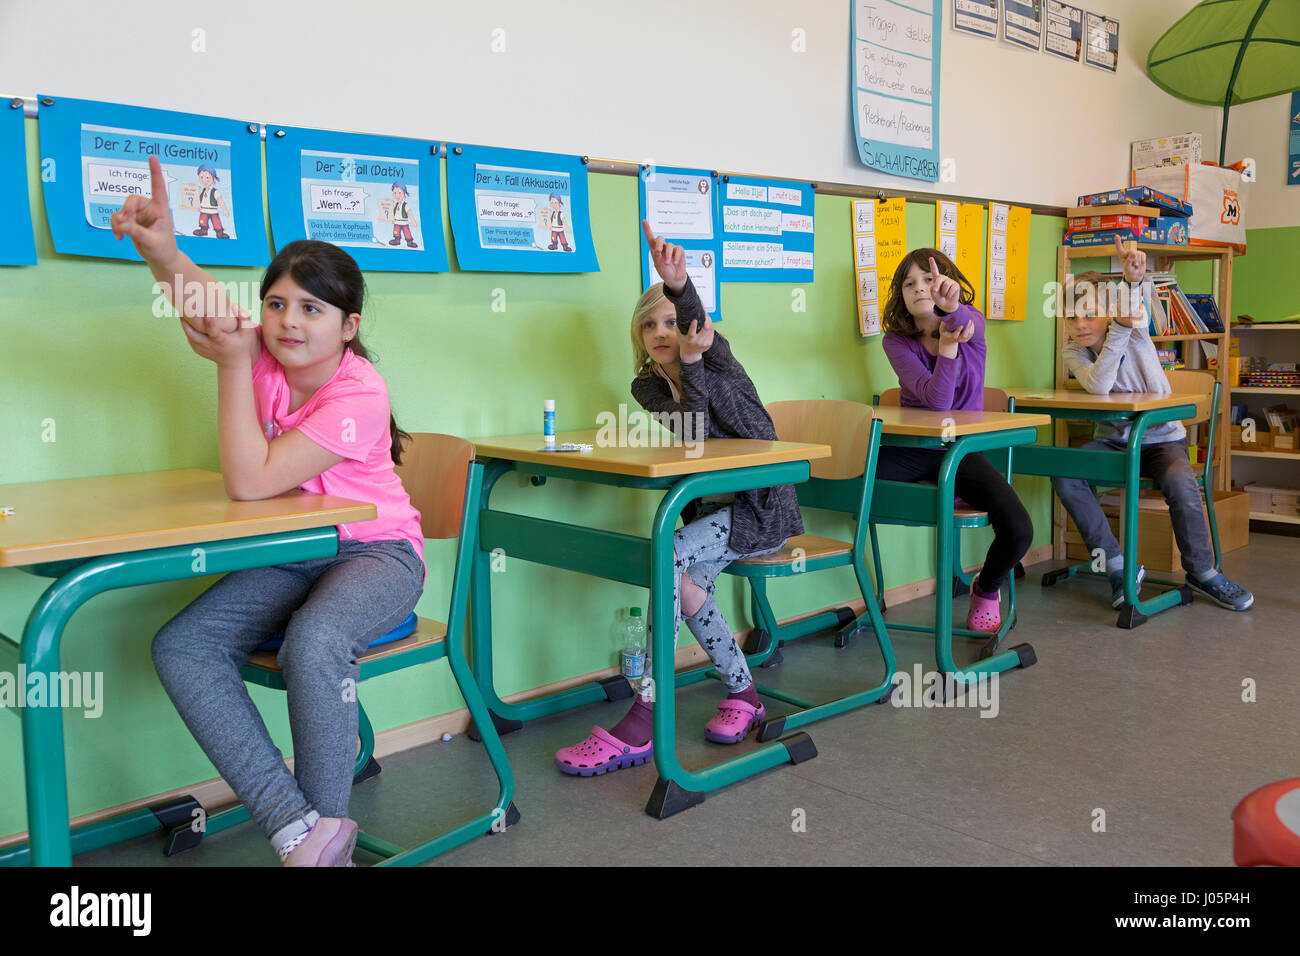 pupils at primary school raising their hands, Lower Saxony, Germany Stock Photo